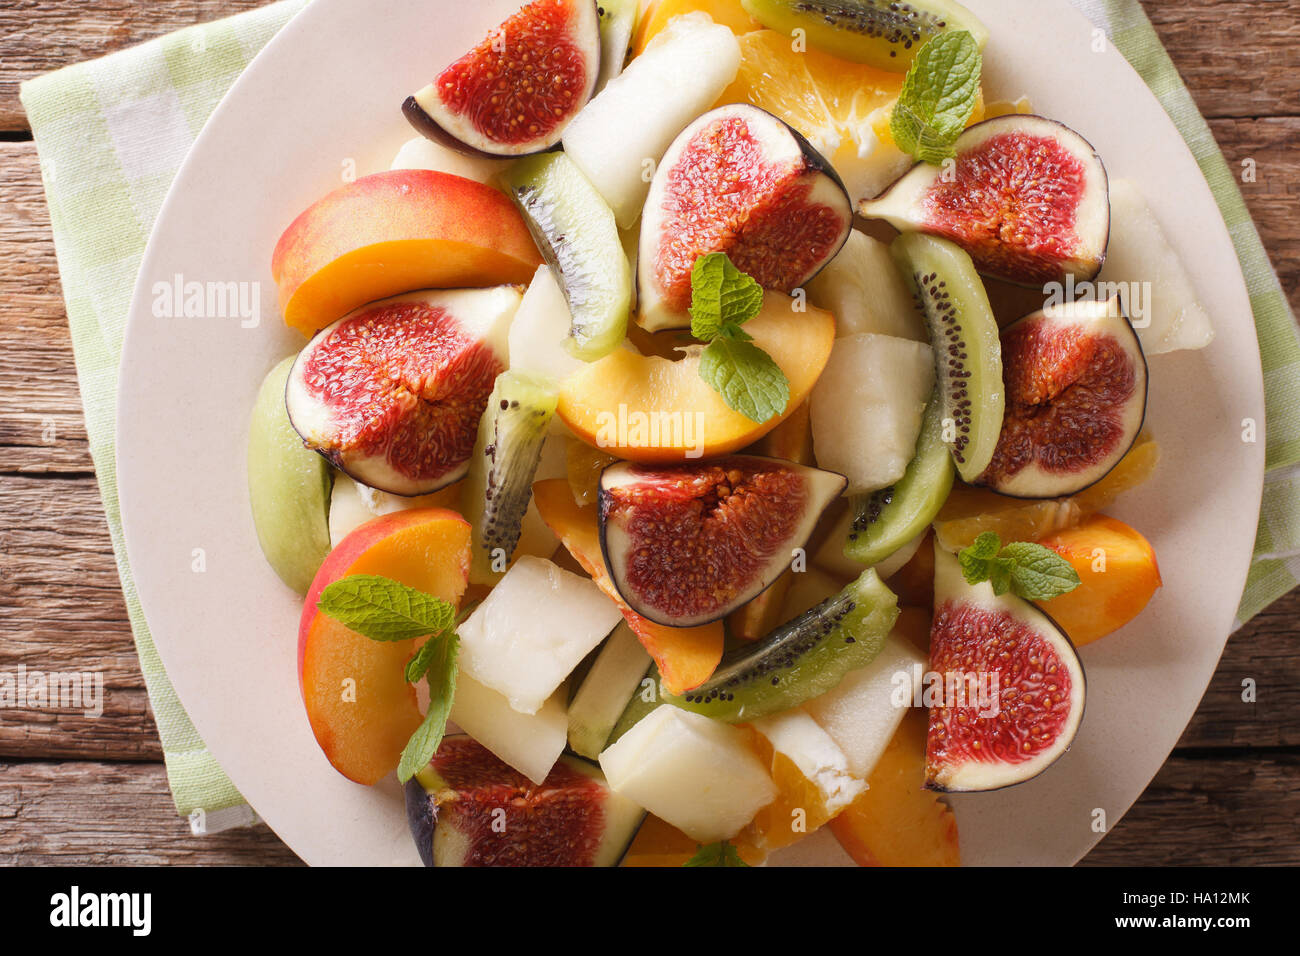 Salad of ripe fruit: figs, peaches, melons, kiwi and orange close-up on a plate. Horizontal view from above Stock Photo